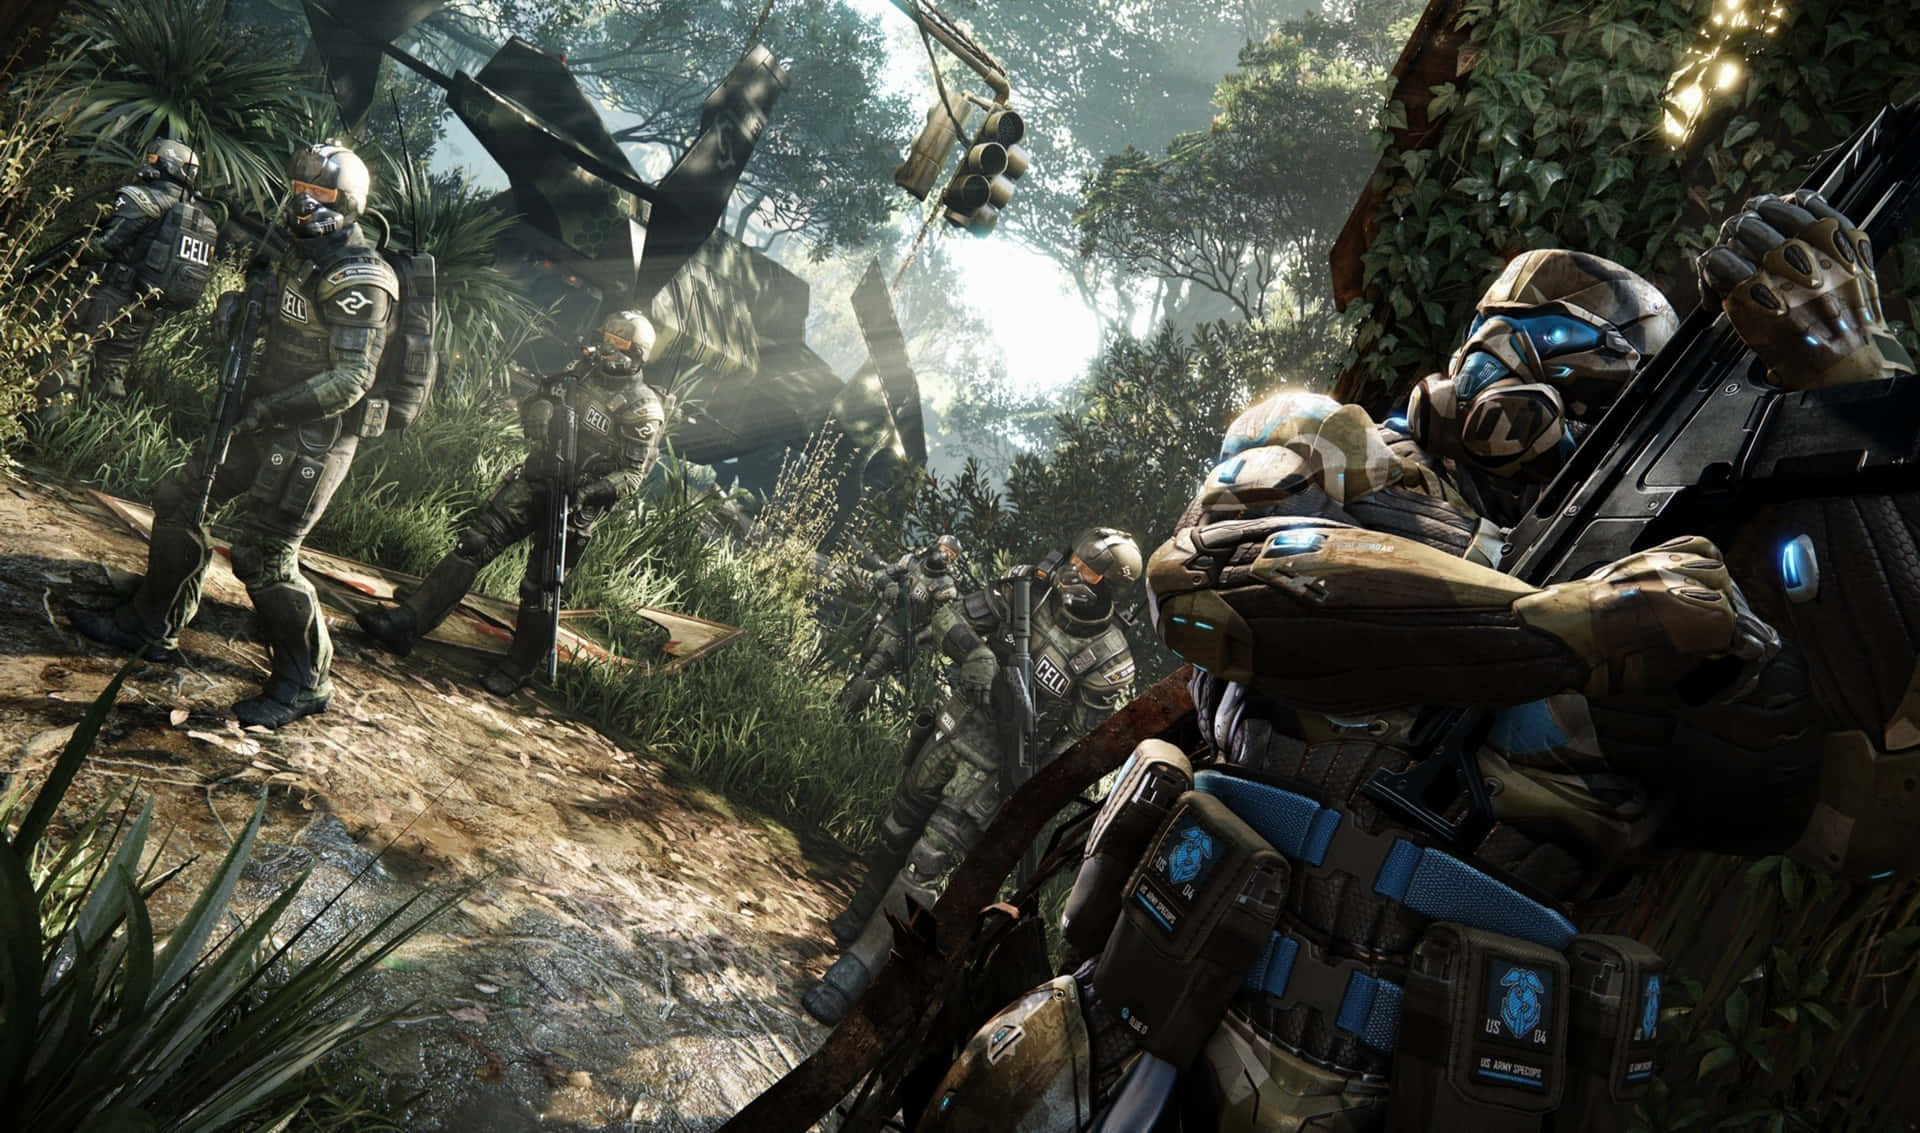 A Group Of Soldiers In A Forest